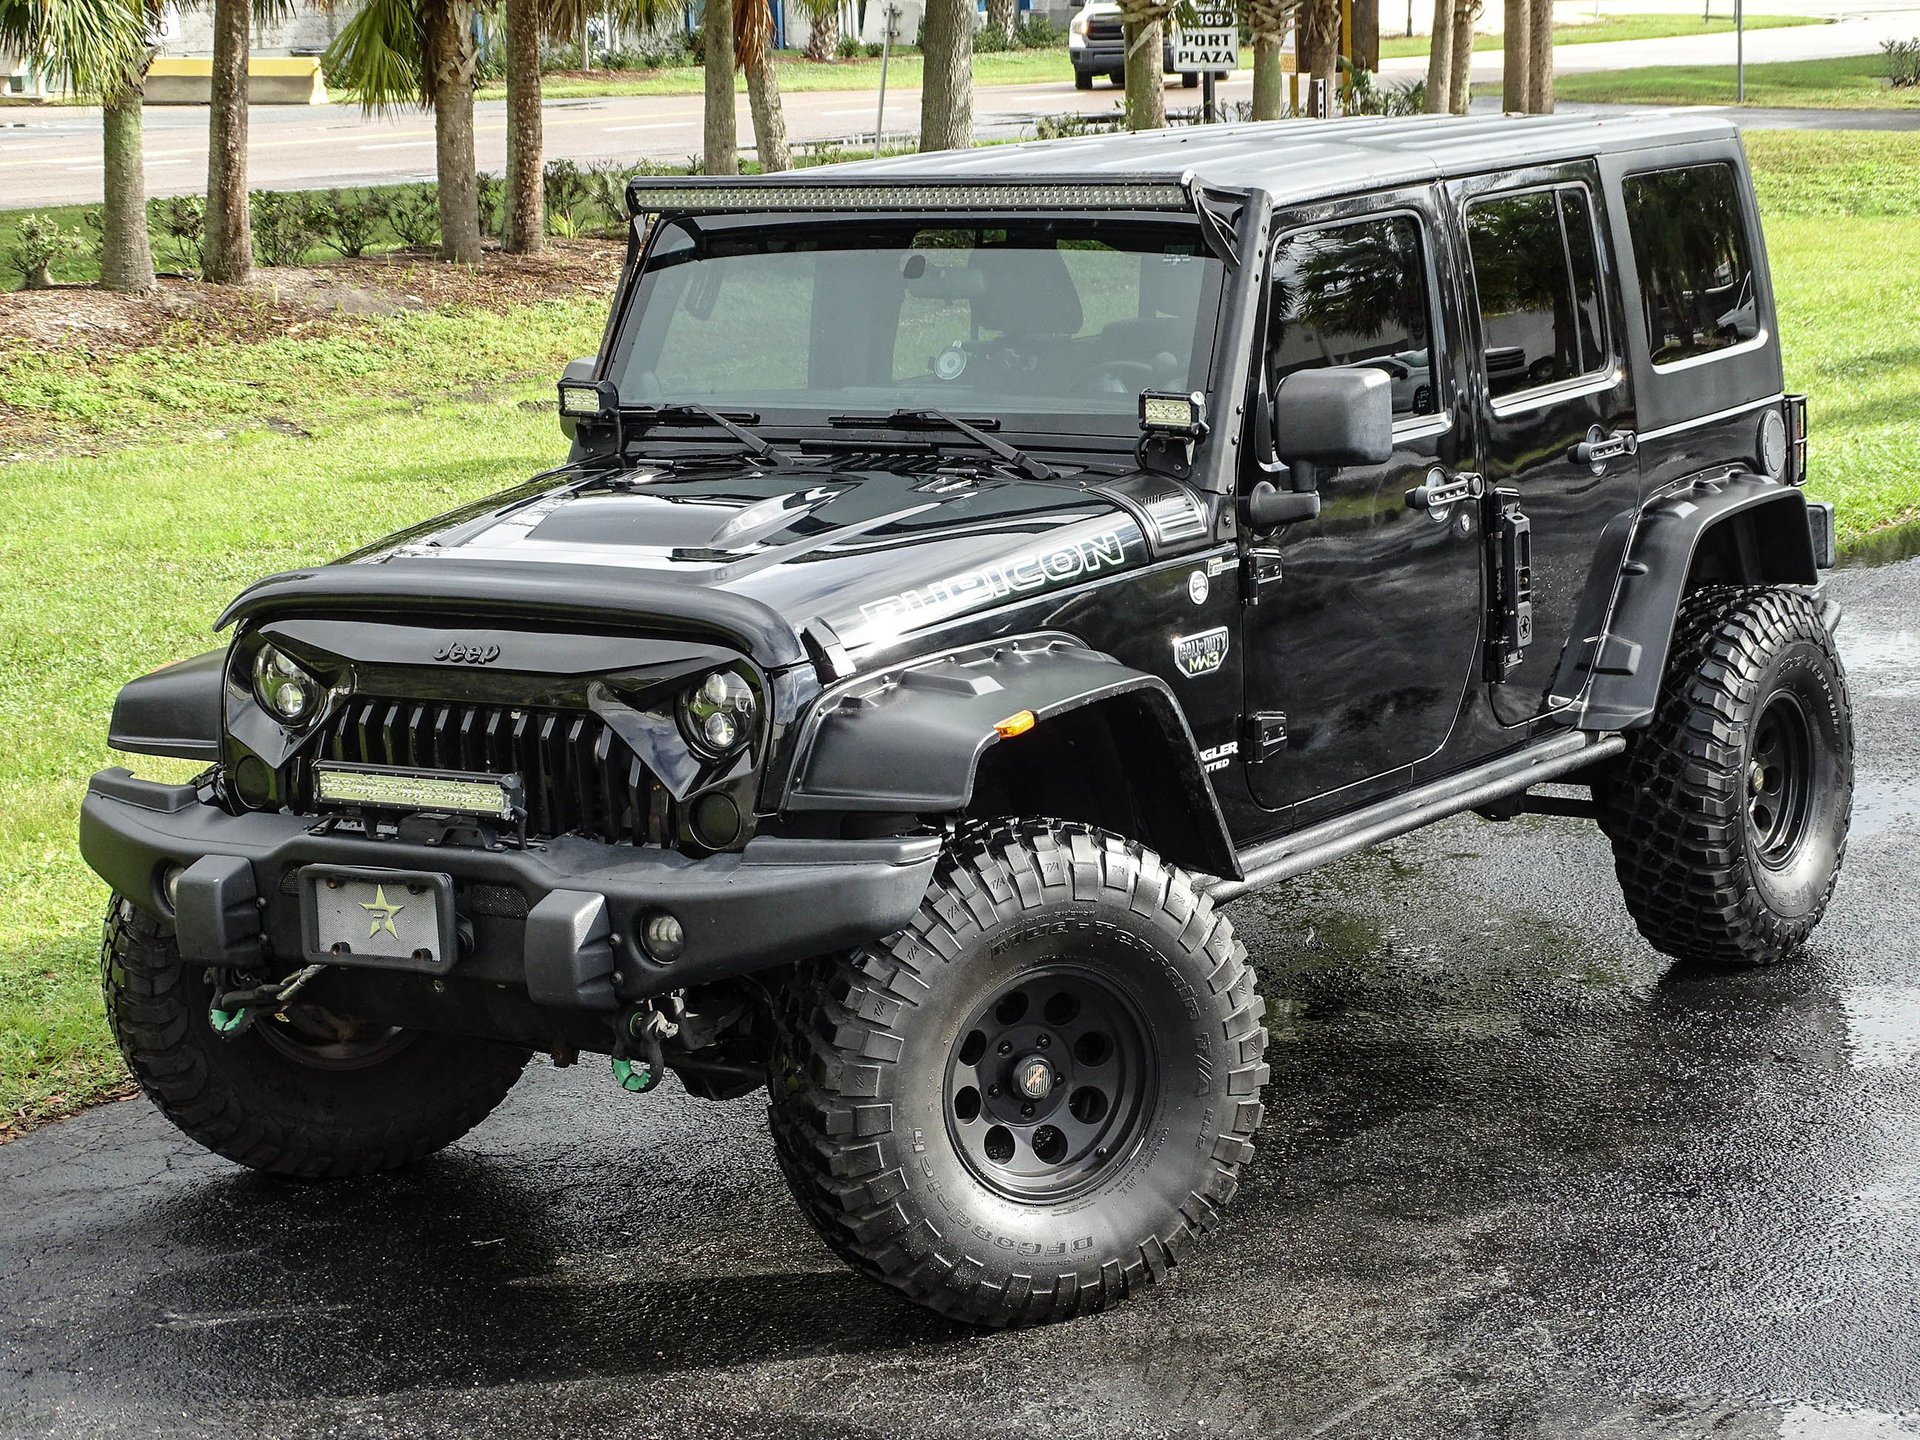 2012 Jeep Wrangler Rubicon Unlimited Call of Duty MW3 Edition for Sale |  Fourbie Exchange Auctions